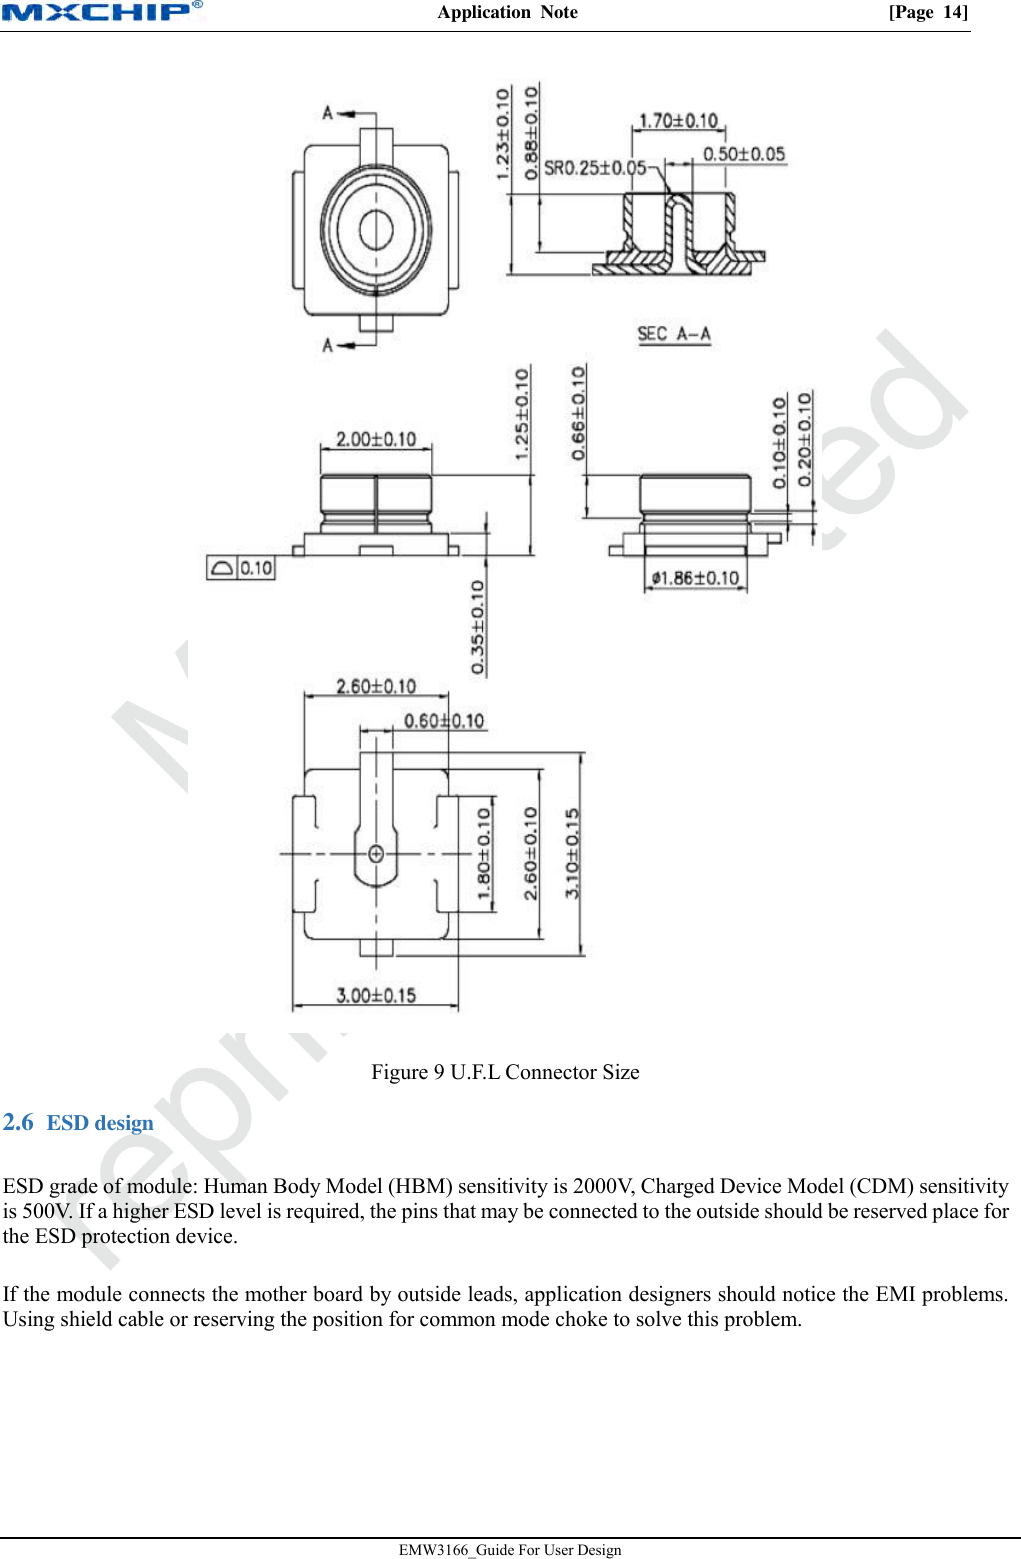 Application  Note  [Page  14]EMW3166_Guide For User Design Figure 9 U.F.L Connector Size  ESD design 2.6ESD grade of module: Human Body Model (HBM) sensitivity is 2000V, Charged Device Model (CDM) sensitivity is 500V. If a higher ESD level is required, the pins that may be connected to the outside should be reserved place for the ESD protection device. If the module connects the mother board by outside leads, application designers should notice the EMI problems. Using shield cable or reserving the position for common mode choke to solve this problem. 